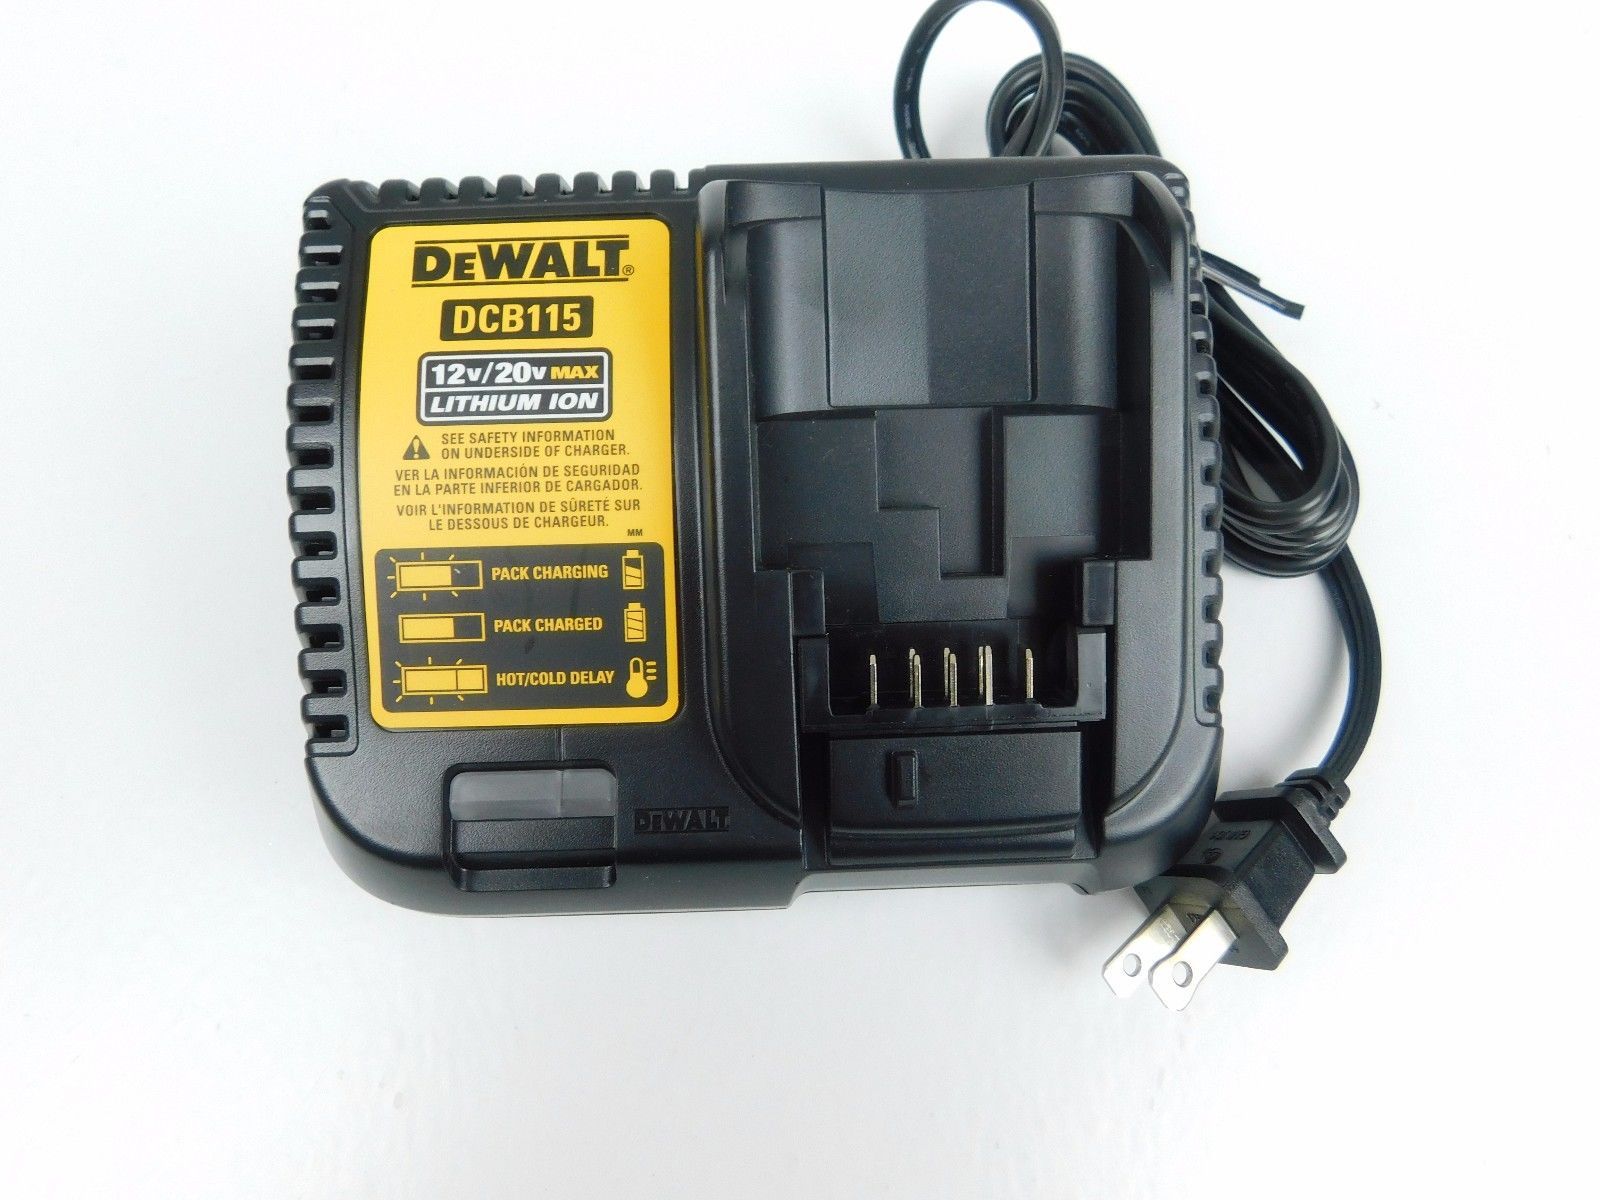 20V Max Lithium Ion Battery and Charger